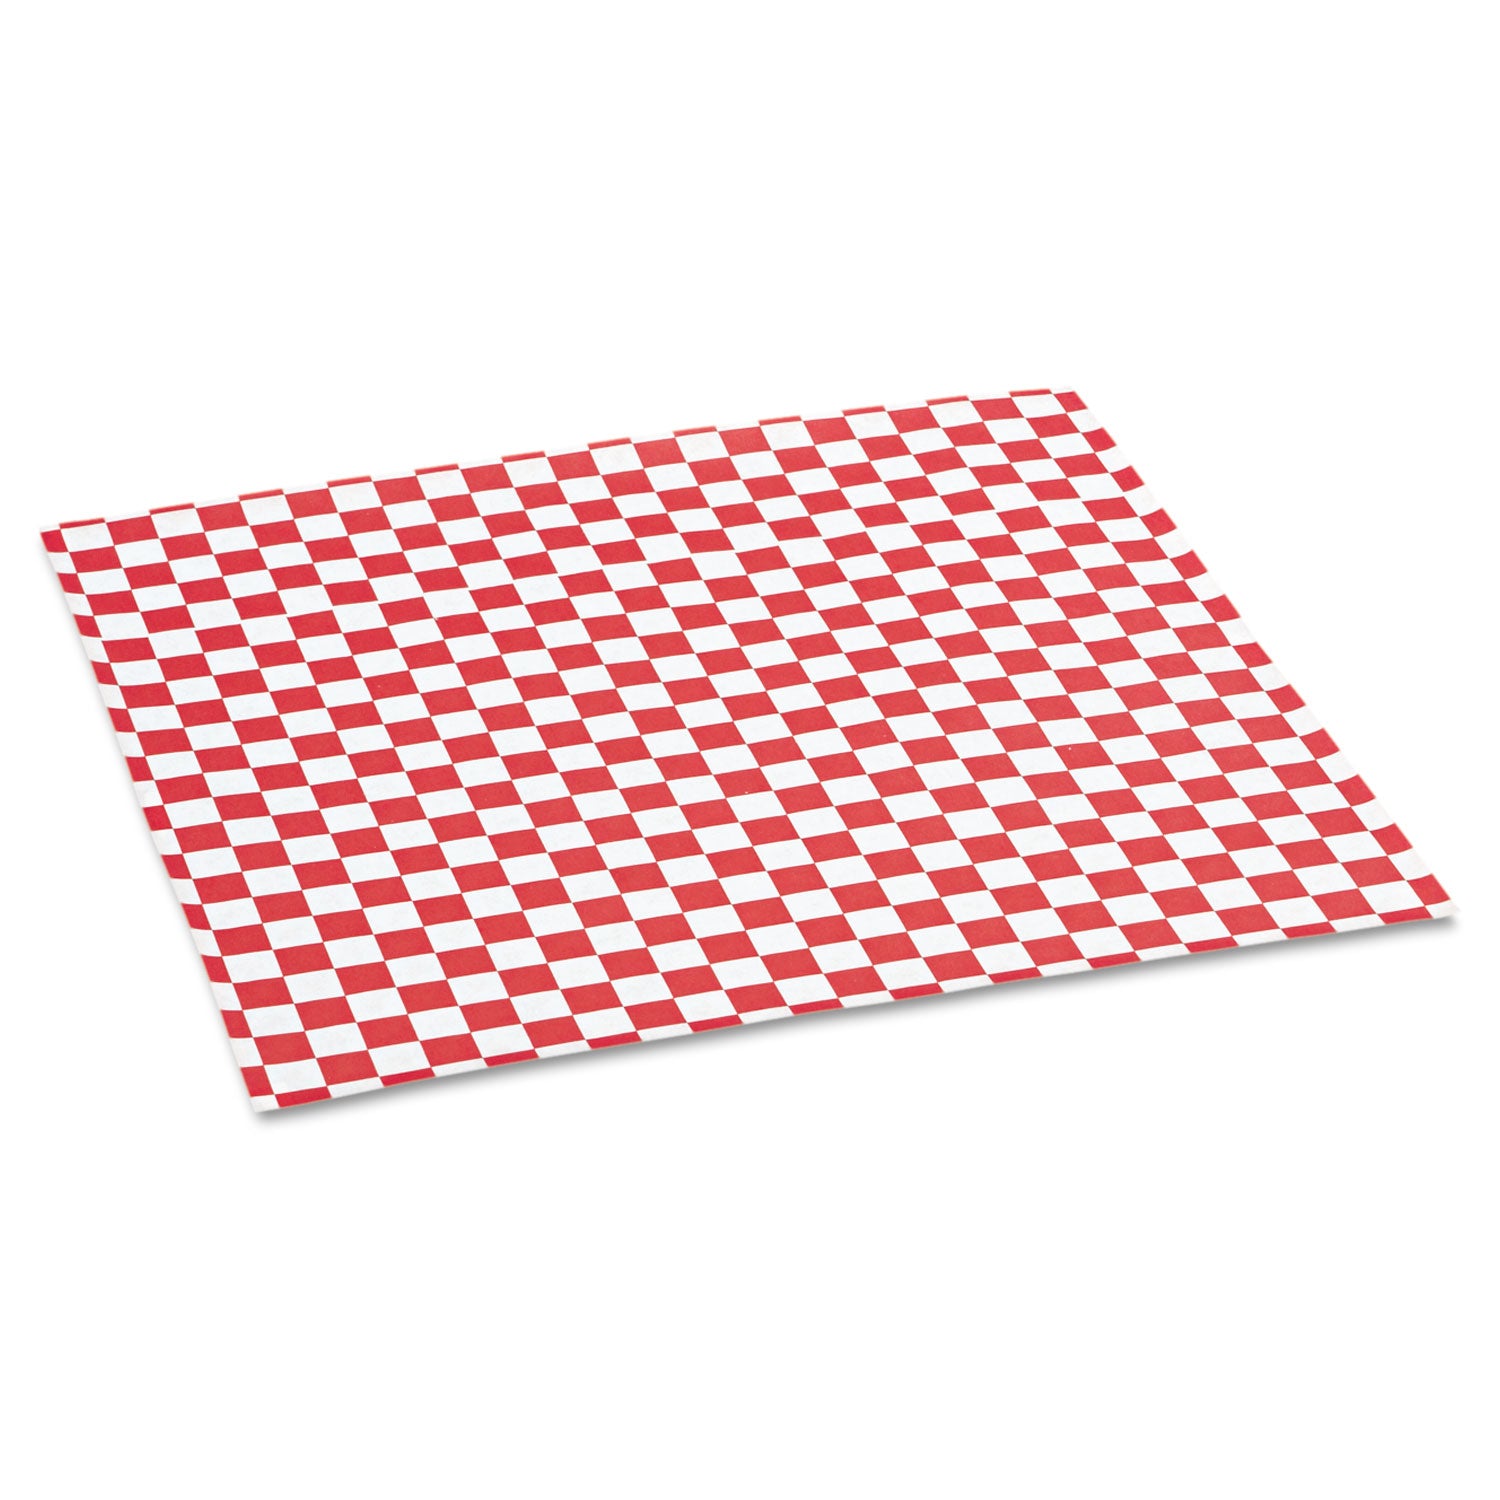 Grease-Resistant Paper Wraps and Liners, 12 x 12, Red Check, 1,000/Box, 5 Boxes/Carton - 